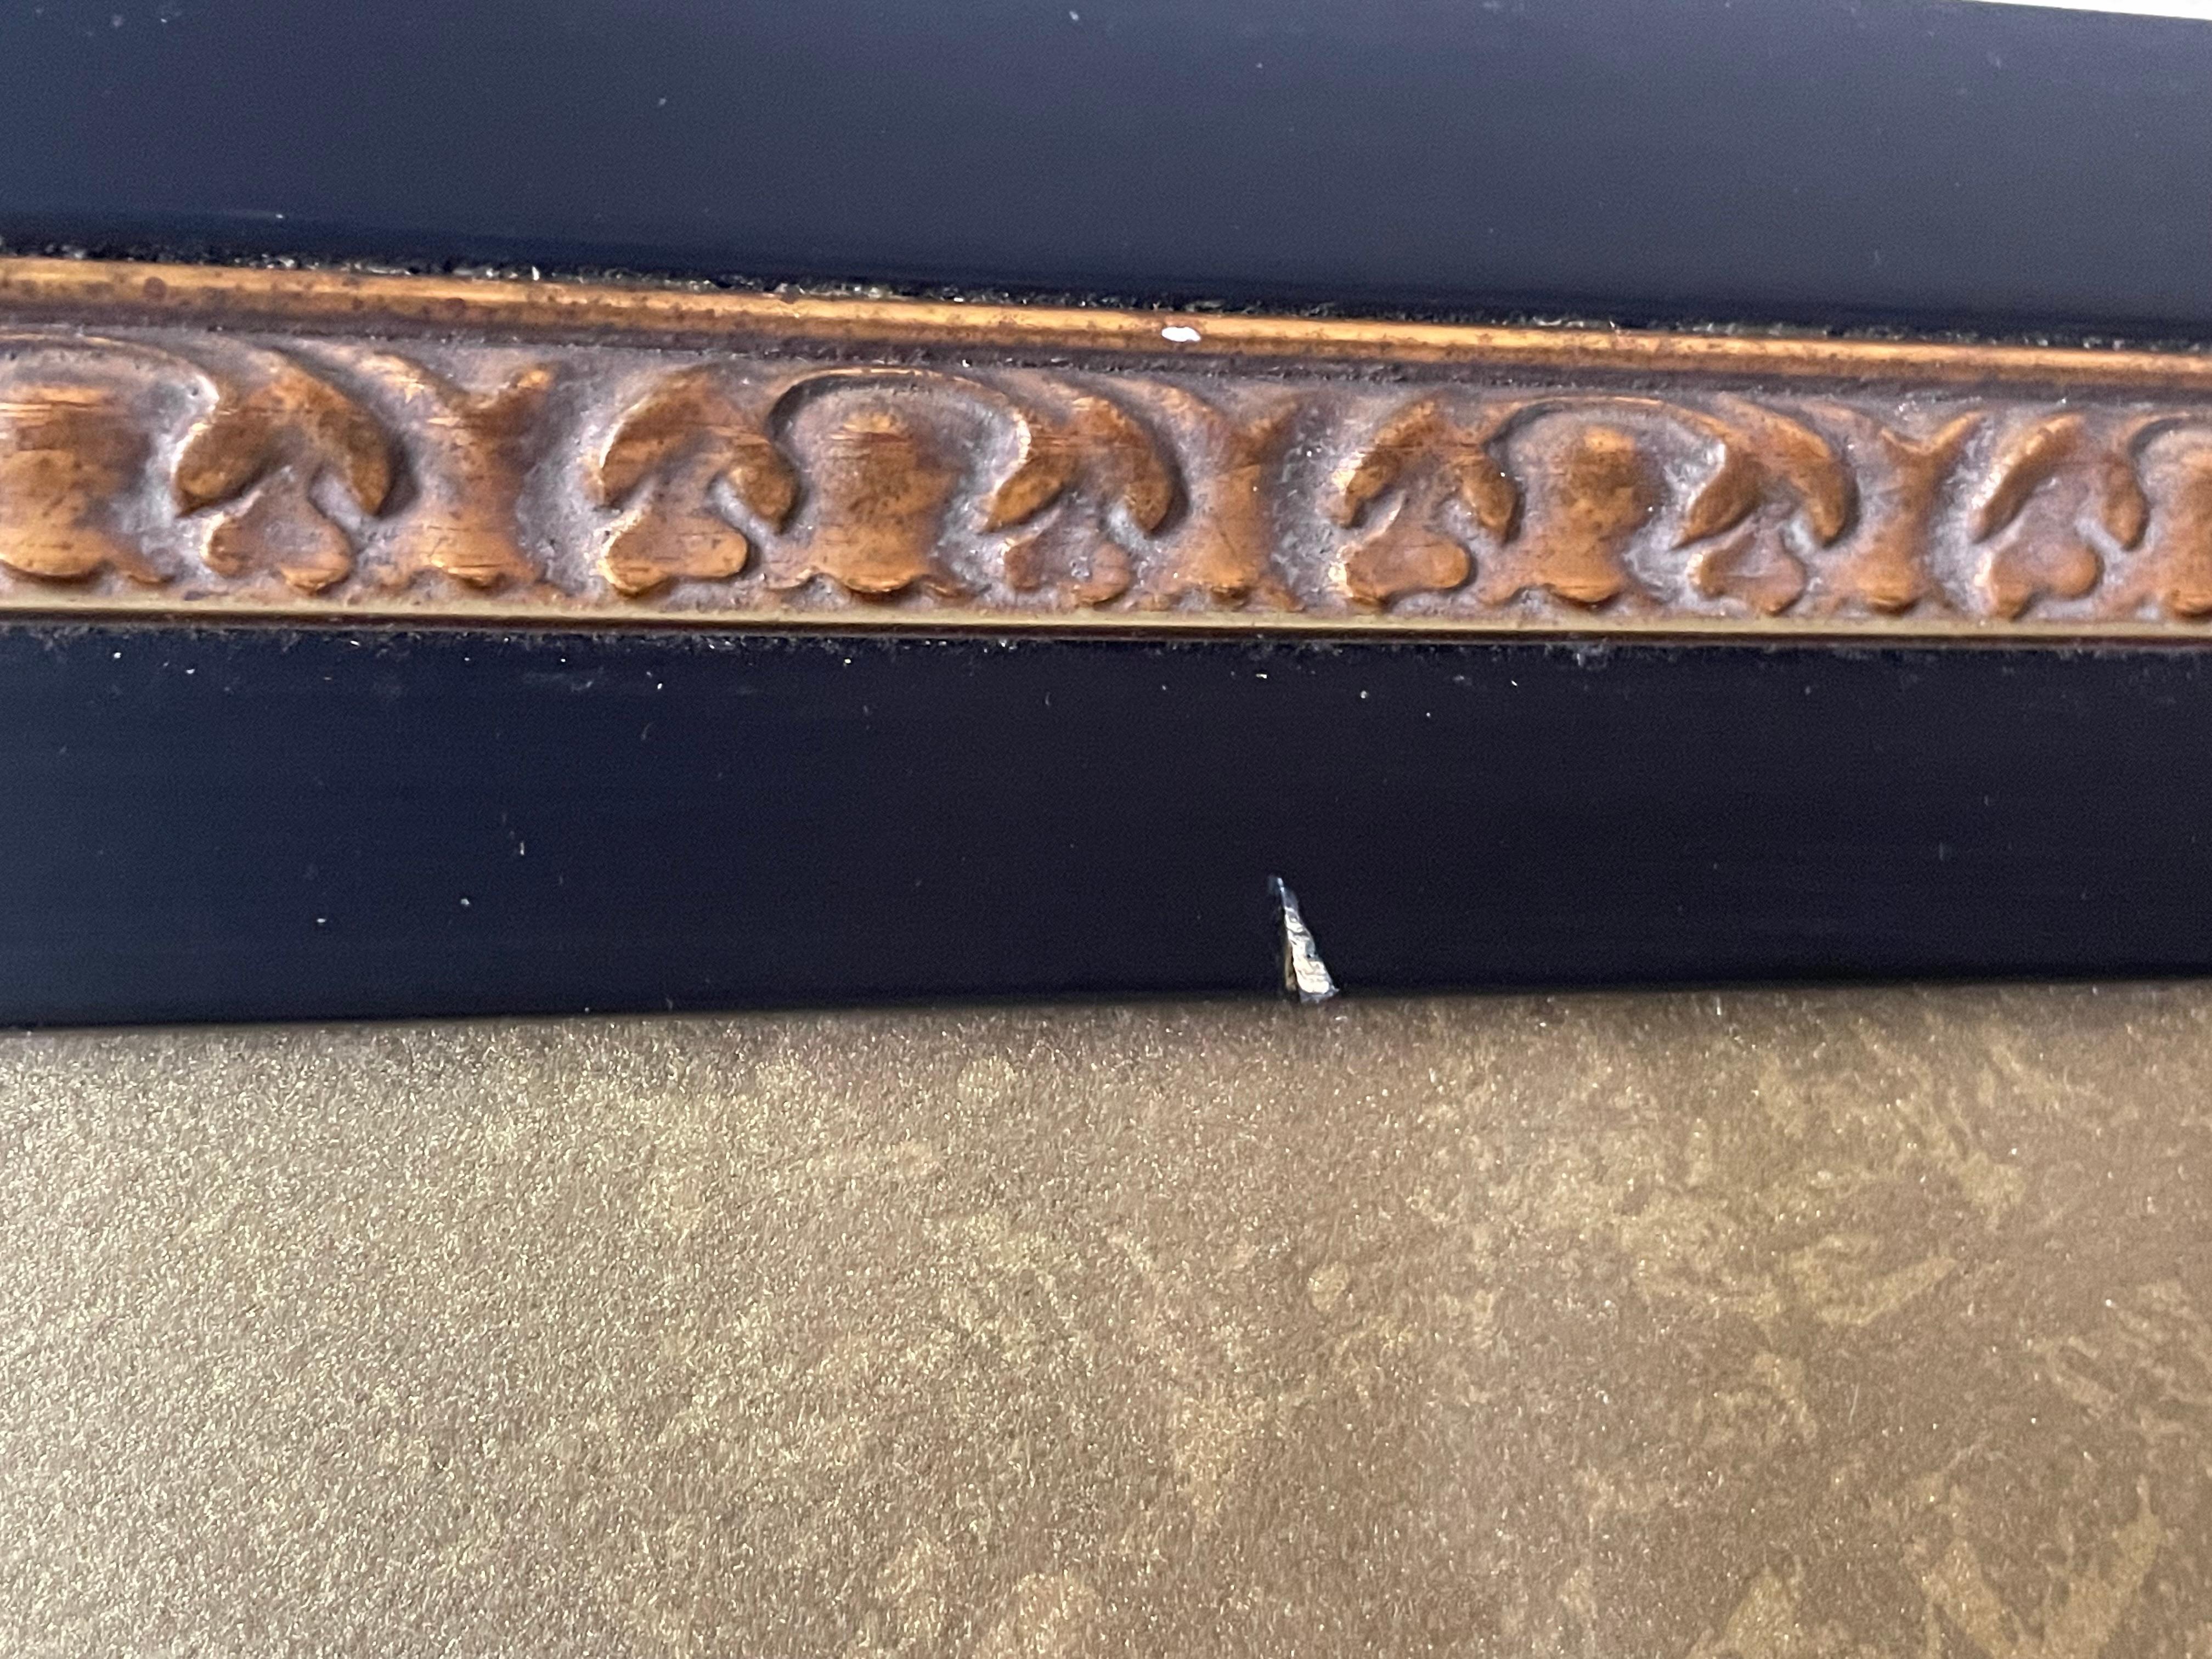 ﻿Ware on the frame. Some scratches, one small chip. I would put good or fair condition. Picture itself is in excellent condition
Frame: 34 x 19 x 1
Picture: 29.5 x 14.5
